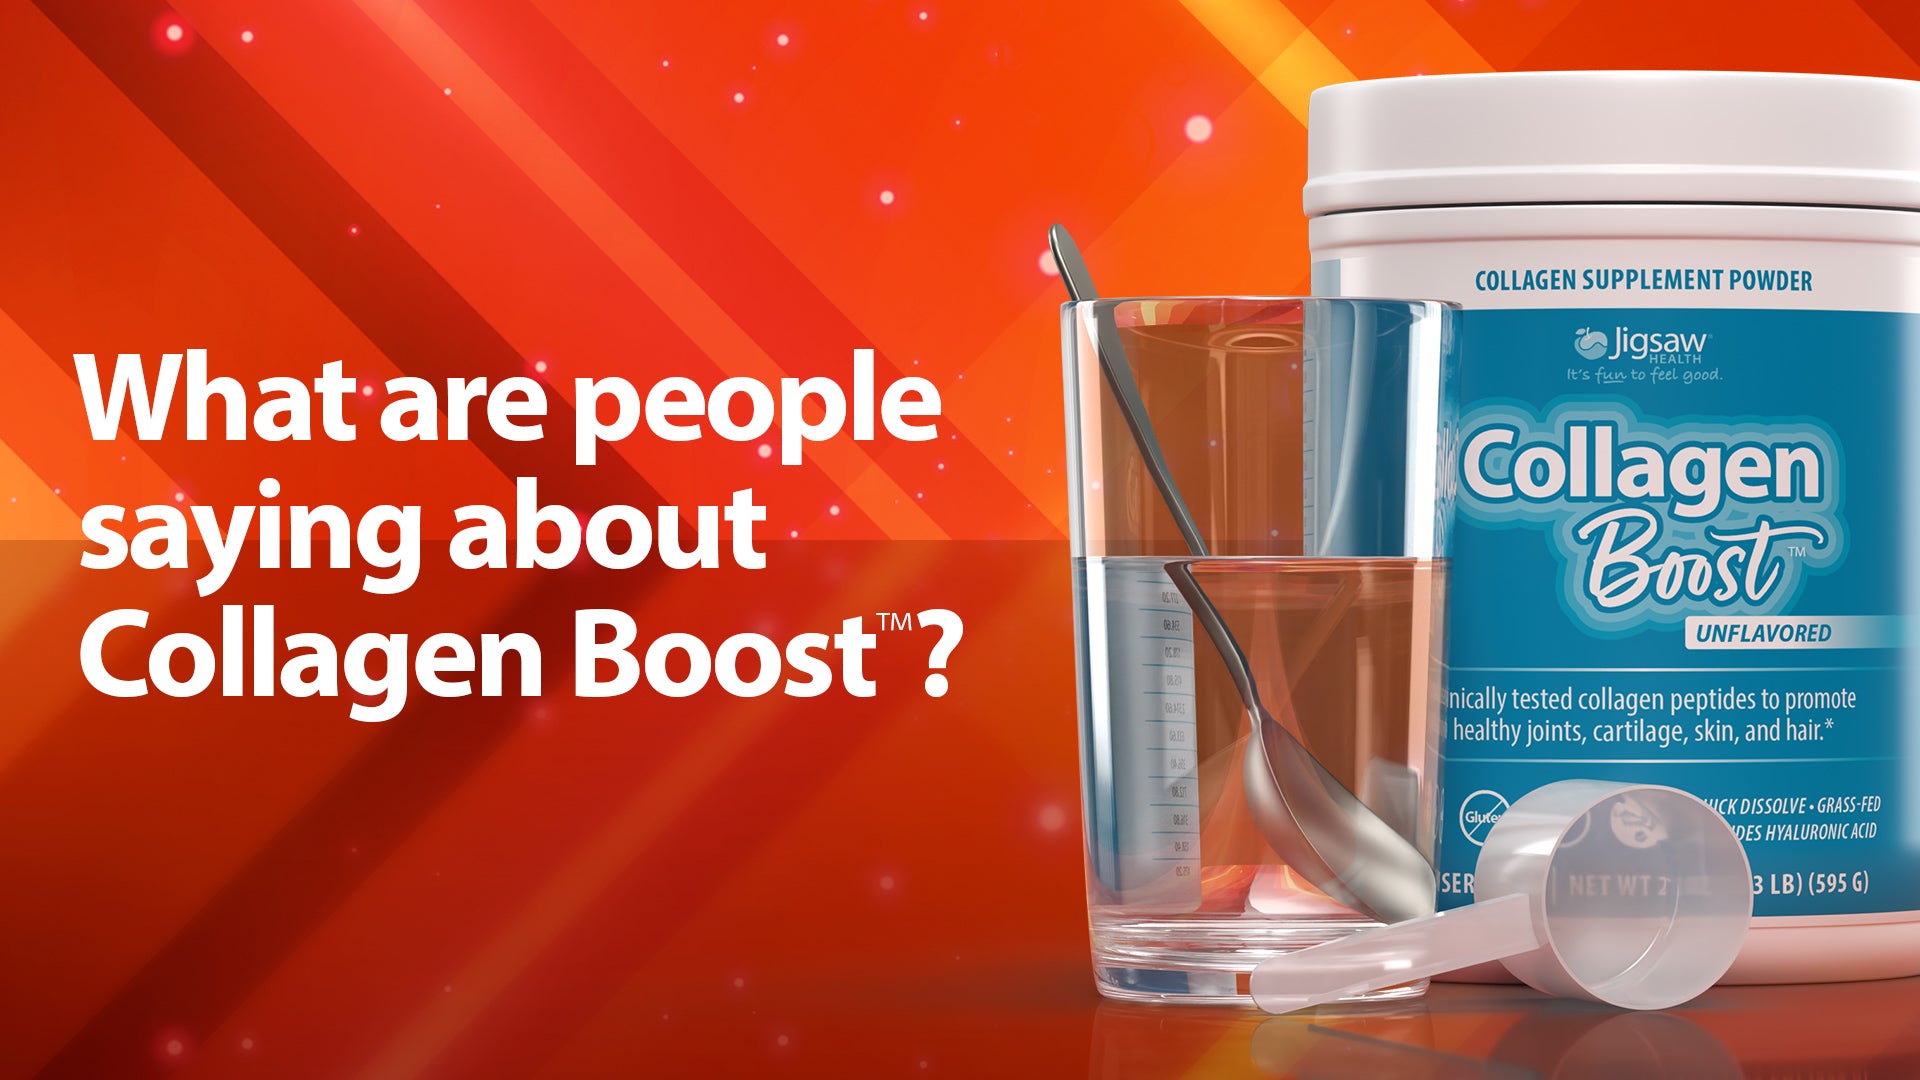 What are people saying about the NEW Jigsaw Collagen Boost?